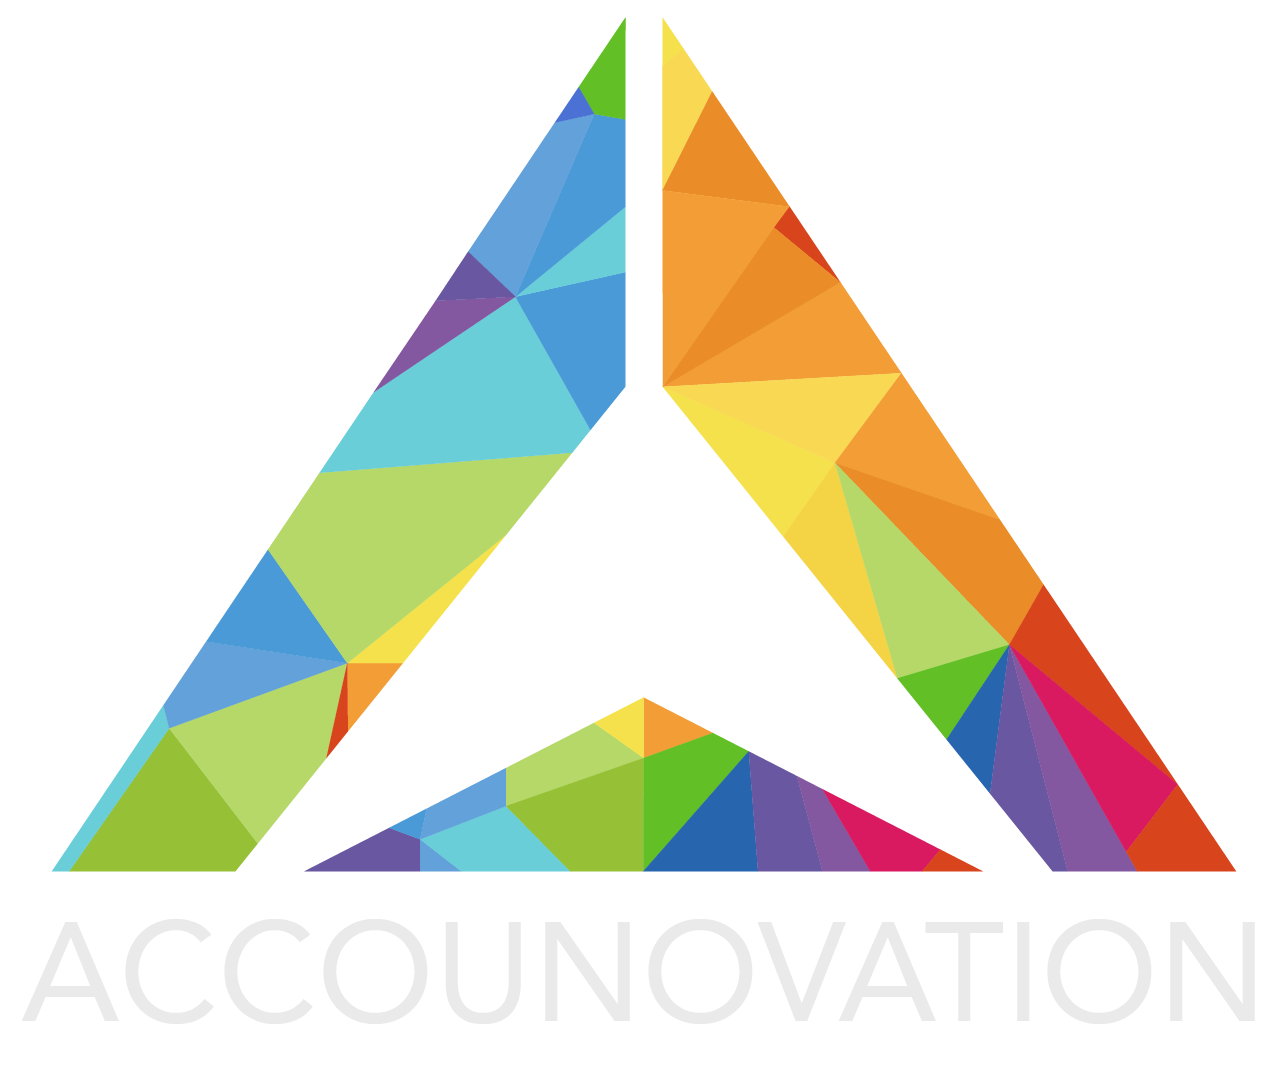 Accounovation logo: Simplifying financial management for manufacturers through virtual accounting services.